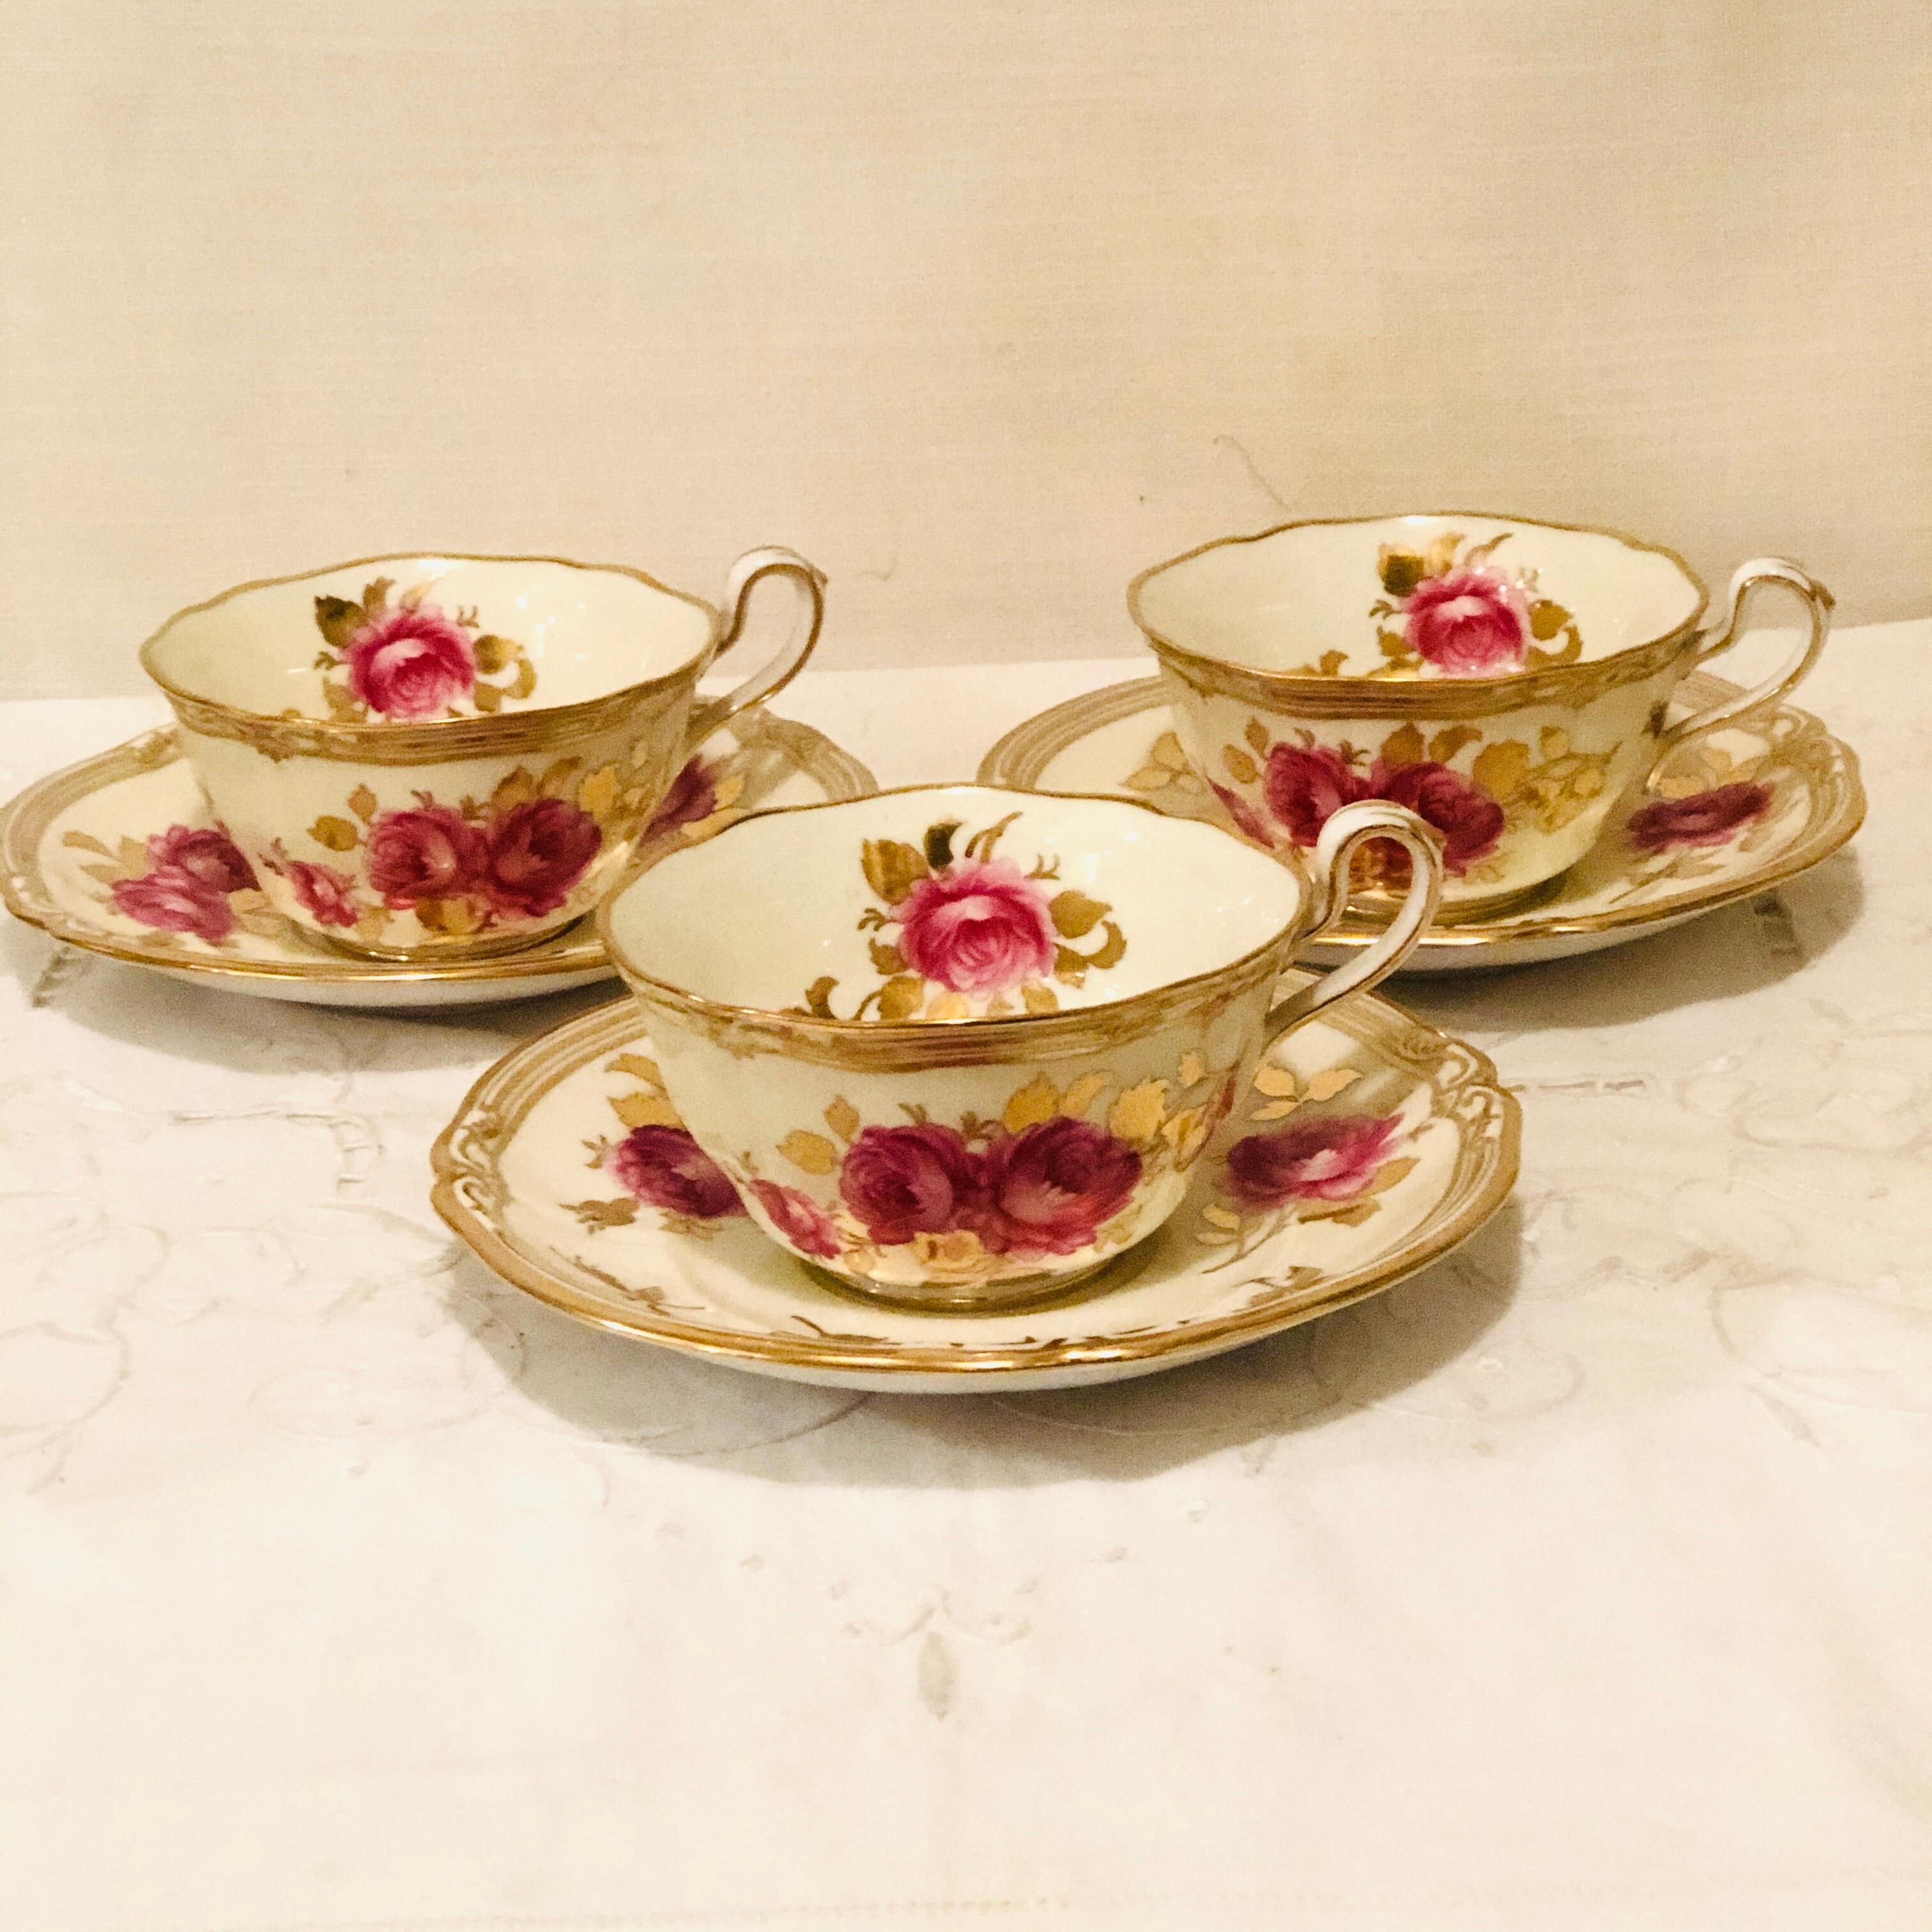 Spode Made for Tiffany 68 Piece Dinner Service Decorated with Large Pink Roses 4